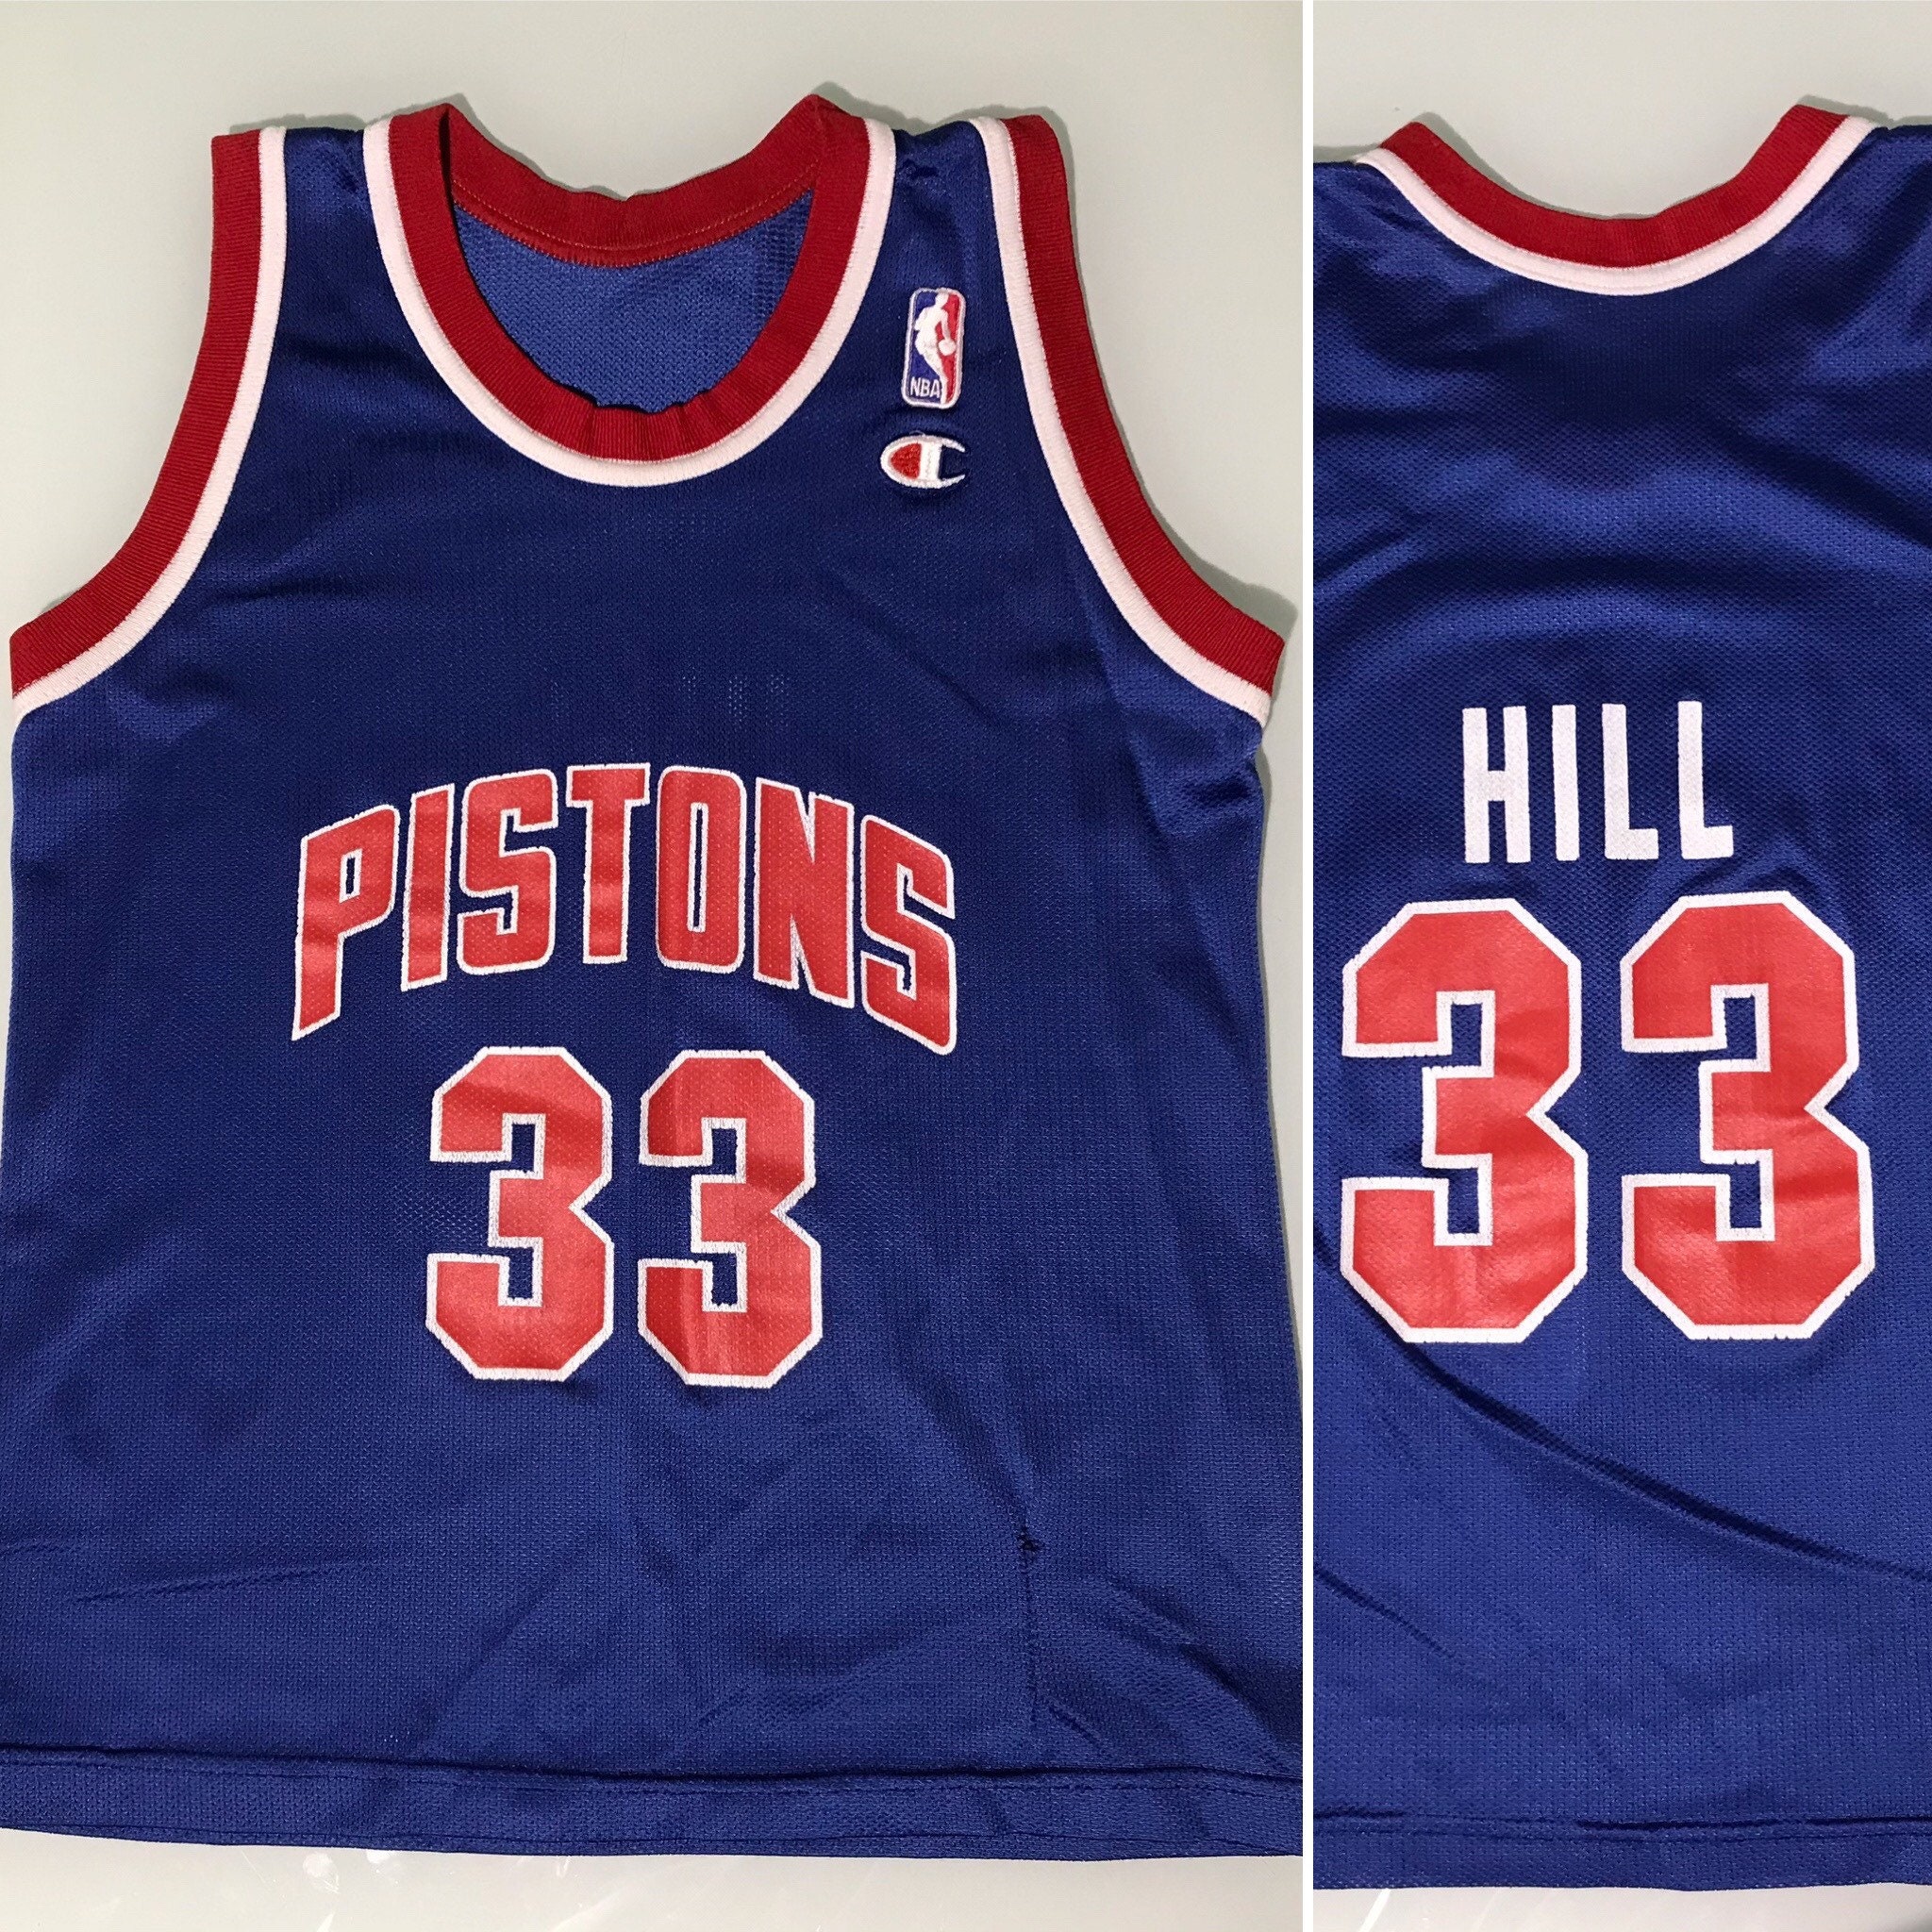 hill pistons throwback jersey